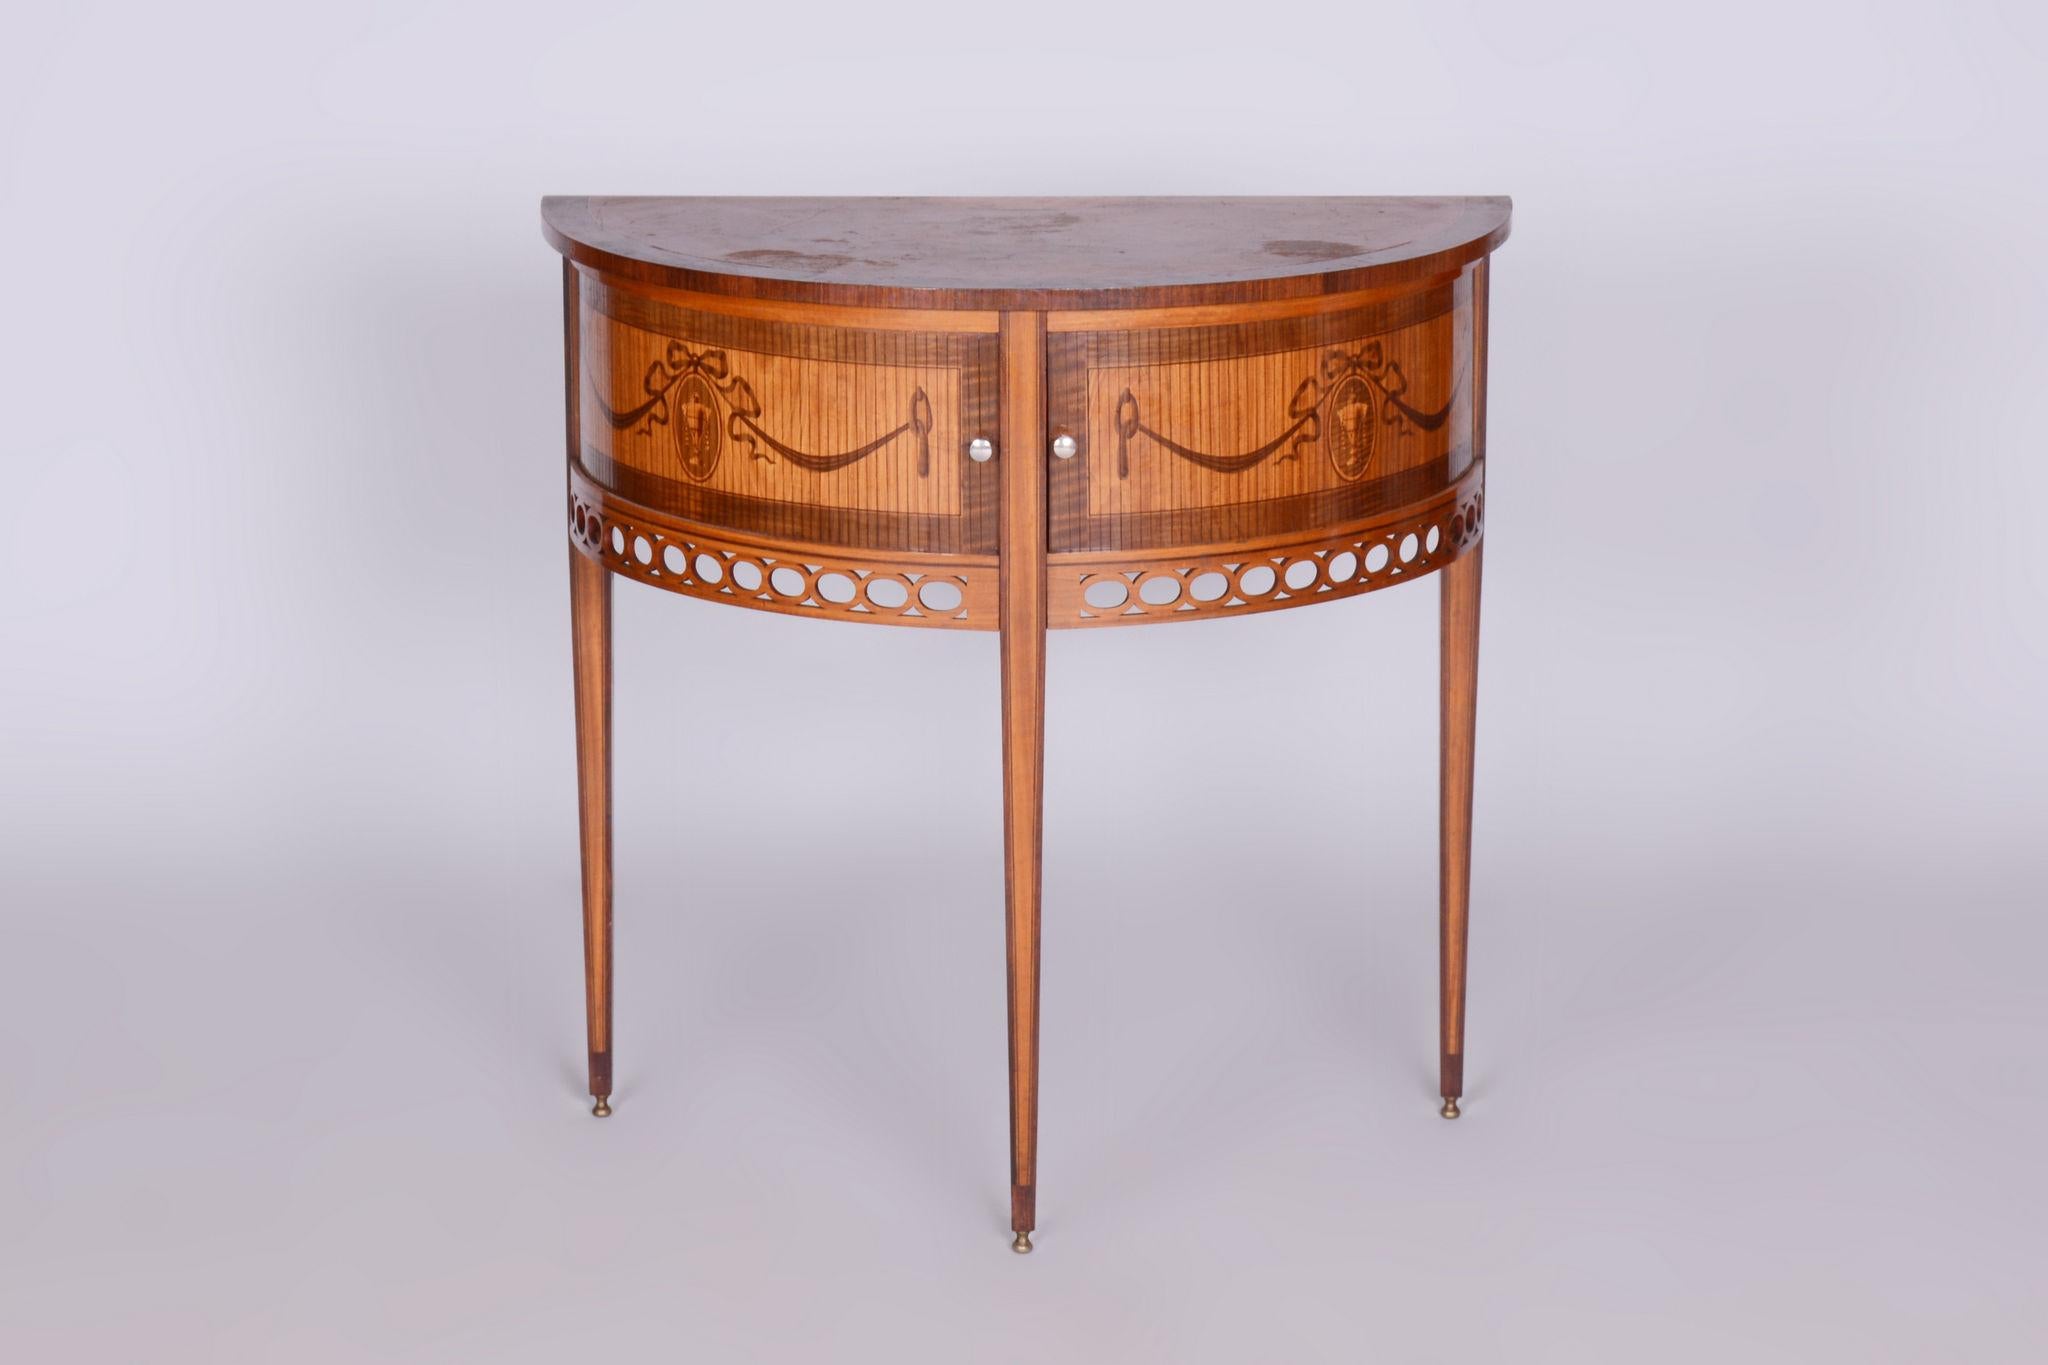 Restored Biedermeier Side Table, Walnut, Maple, Unique Marquetry, France, 1850s For Sale 6